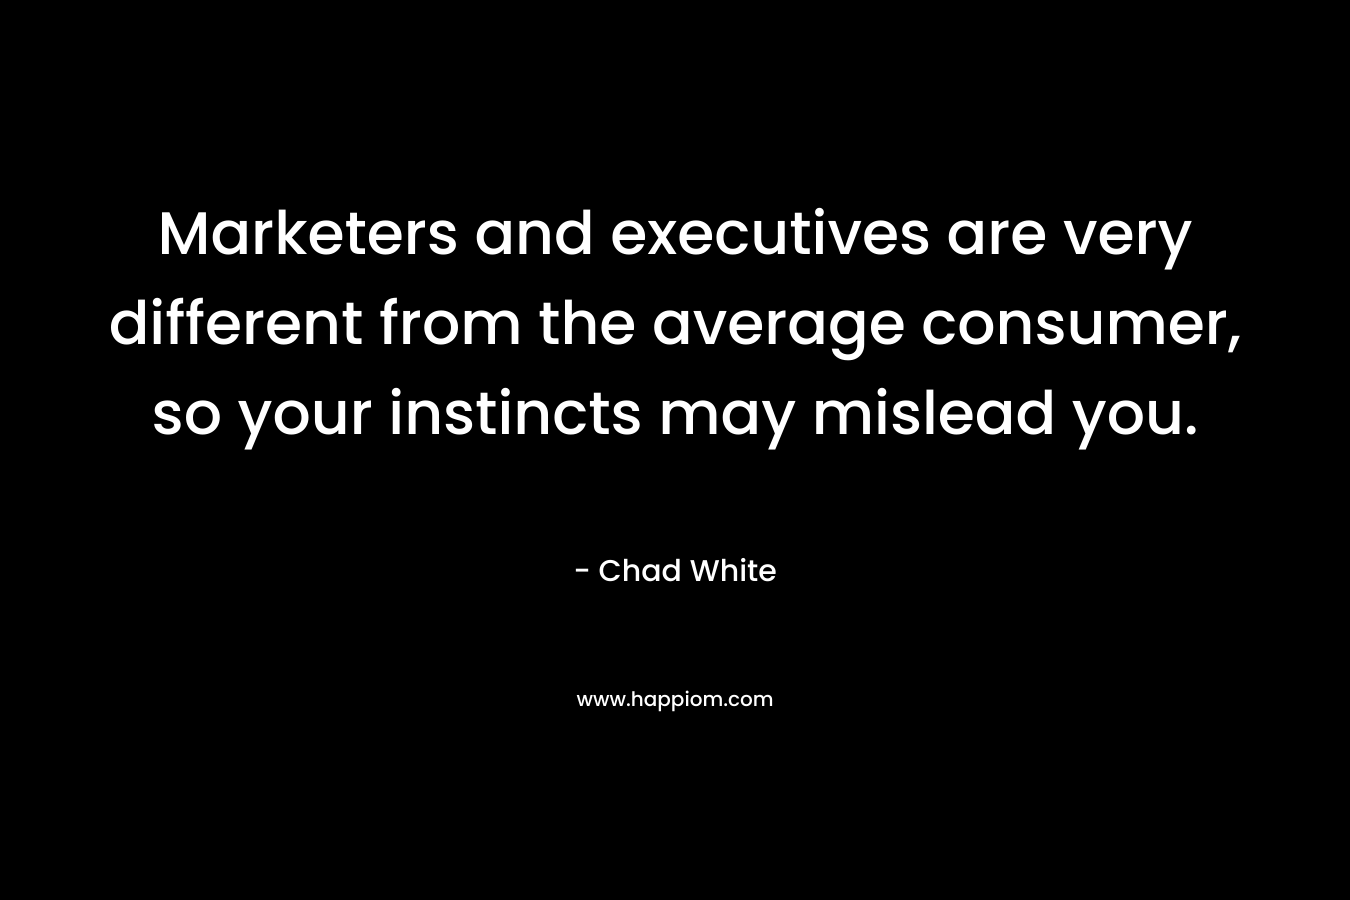 Marketers and executives are very different from the average consumer, so your instincts may mislead you.